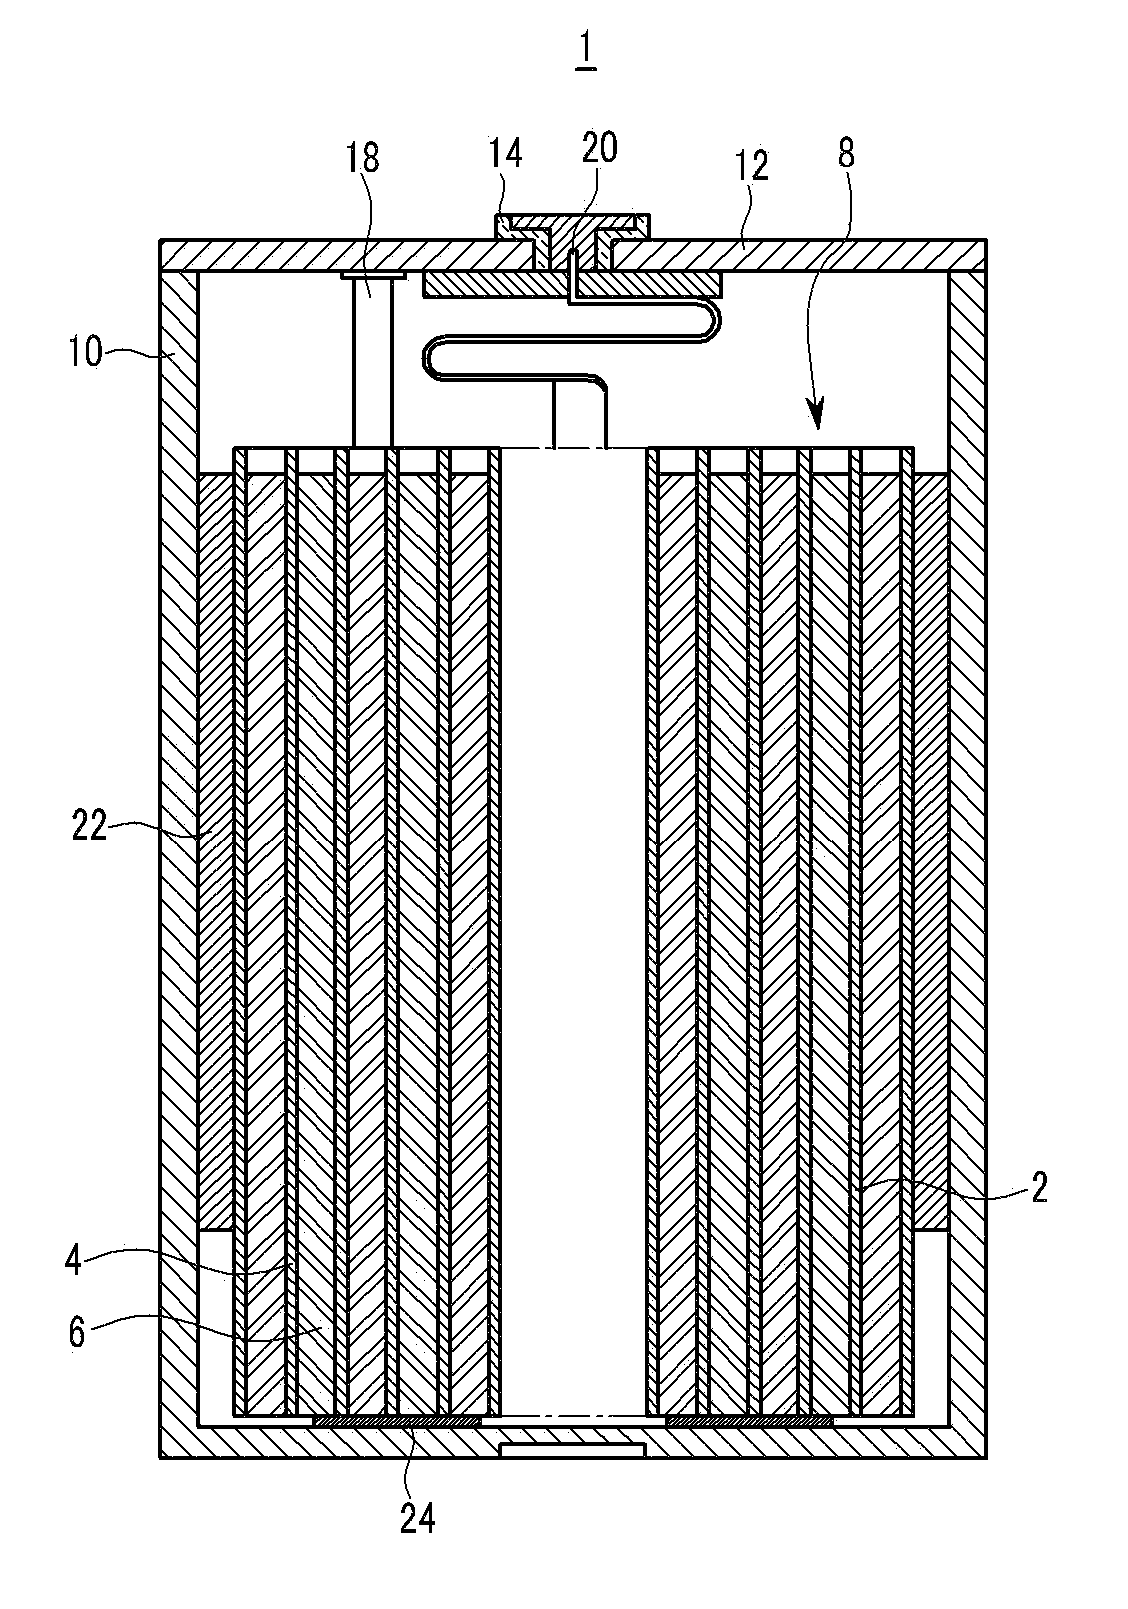 Positive active material for rechargeable lithium battery, method of preparing the same, and rechargeable lithium battery including the same